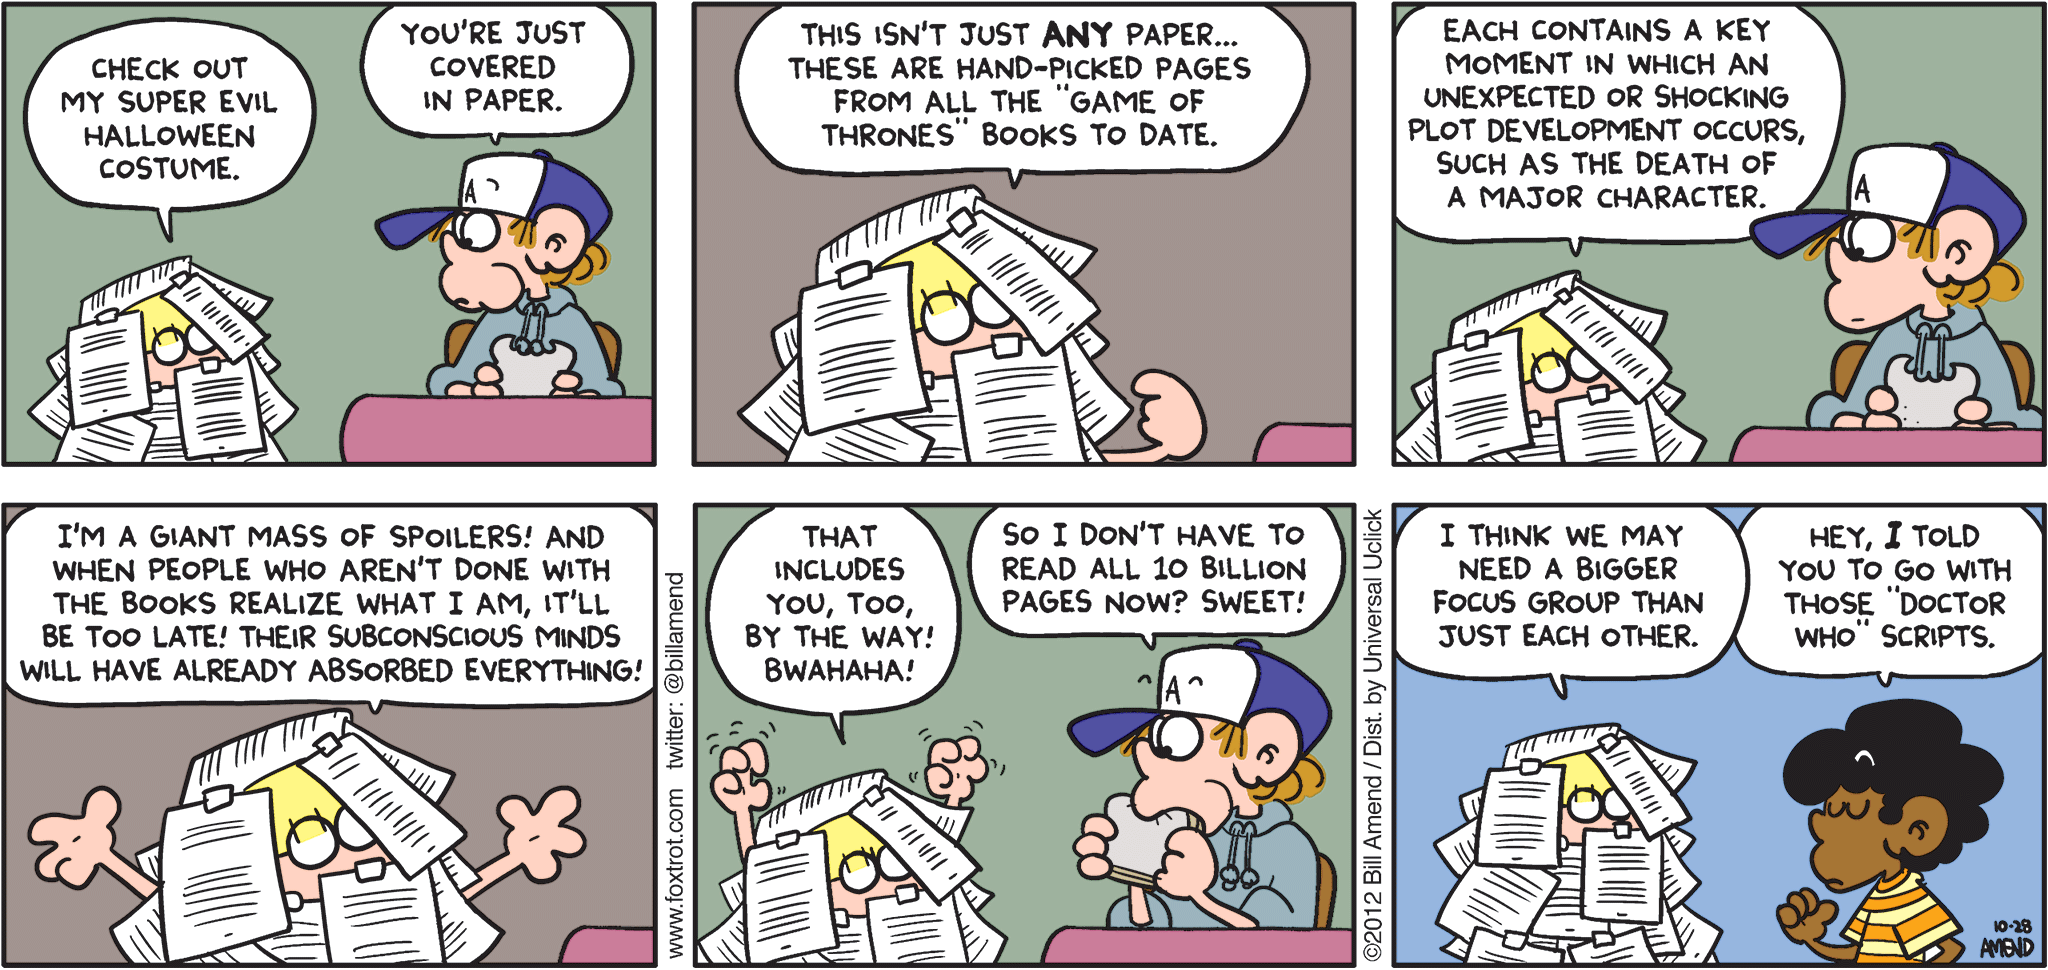 FoxTrot comic strip by Bill Amend - "Don’t Spoil It" published October 28, 2012 - Jason: Check out my super evil Halloween costume. Peter: You're just covered in paper. Jason: This isn't just ANY paper...these are hand-picked pages from all the "Game of Thrones" books to date. Each contains a key moment in which an unexpected or shocking plot development occurs, such as the death of a major character. I'm a giant mass of spoilers! And when people who aren't done with the books realize what I am, it'll be too late! Their subconscious minds will have already absorbed everything! That includes you, too, by the way! Bwahaha! Peter: So I don't have to read all 10 billion pages now? Sweet! Jason: I think we may need a bigger focus group than just each other. Marcus: Hey, I told you to go with those "Doctor Who" scripts.